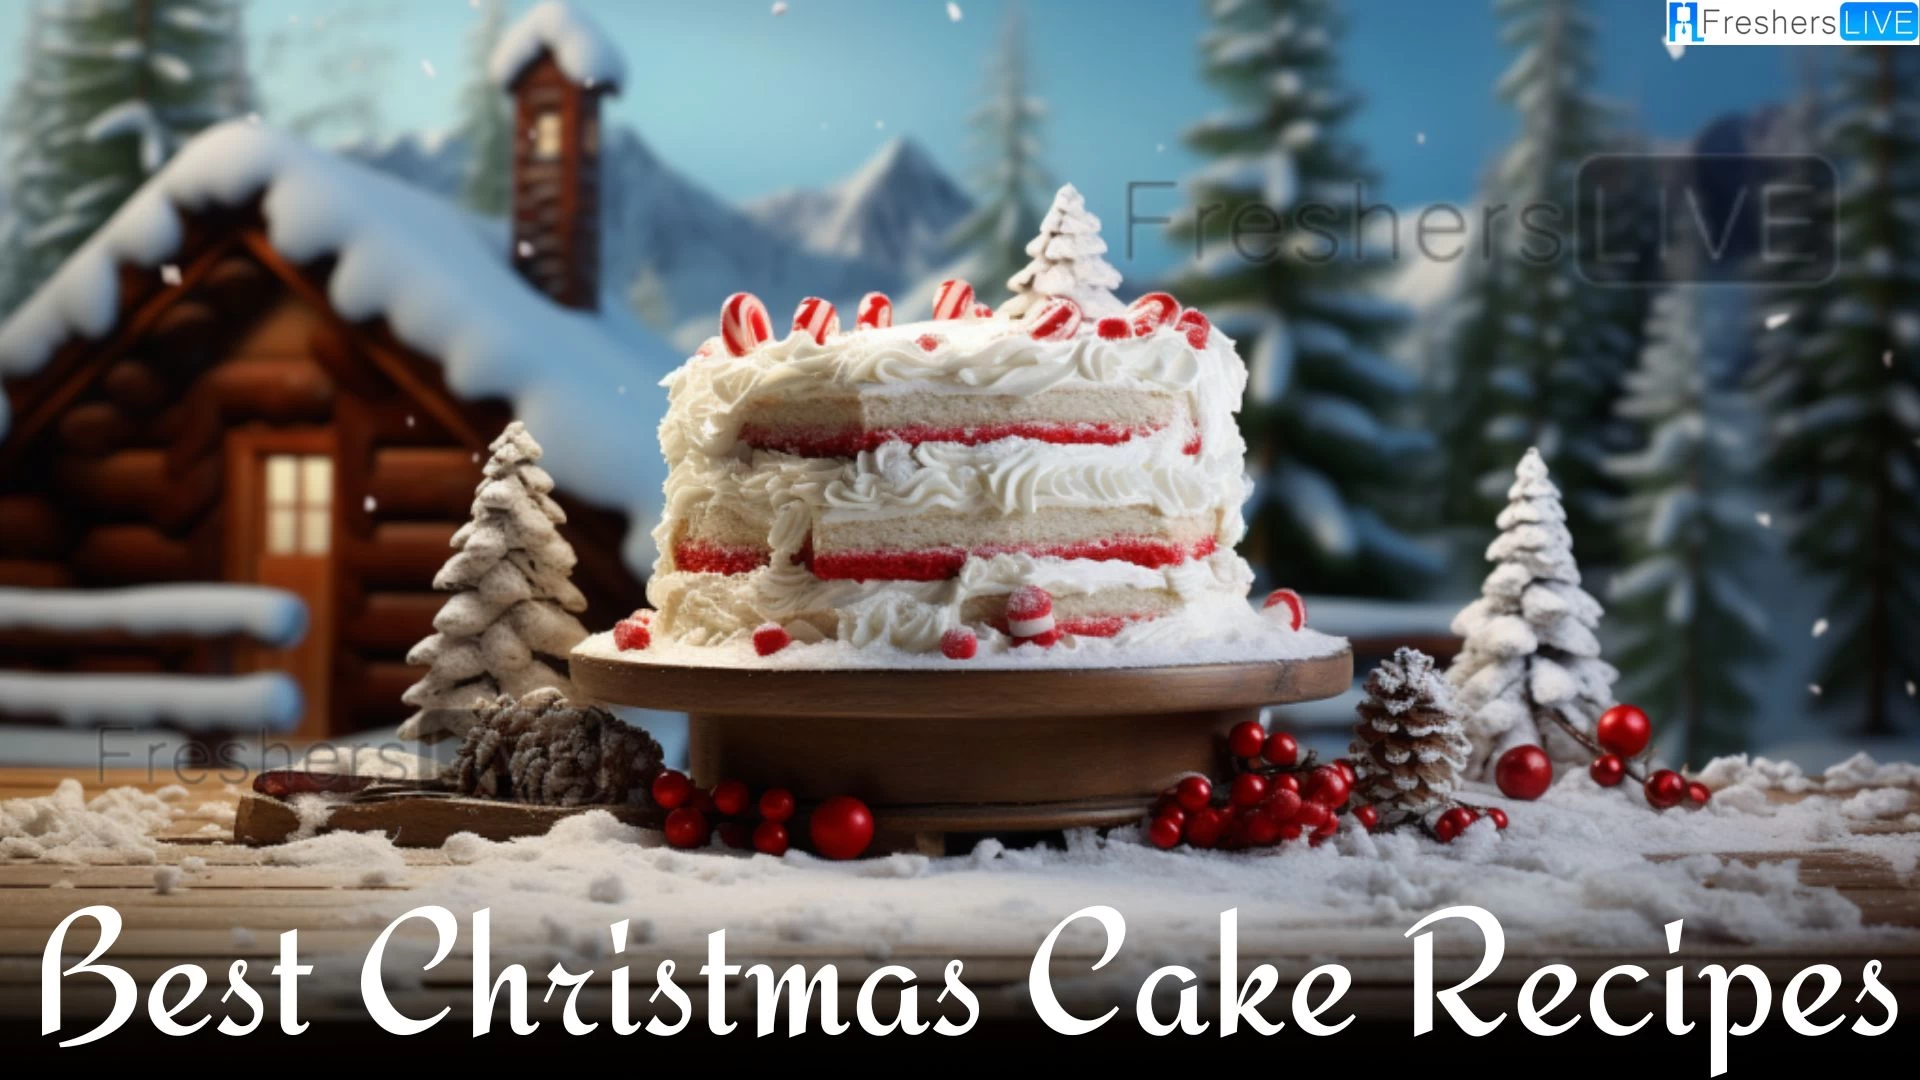 Best Christmas Cake Recipes - Top 10 For a Memorable Celebration